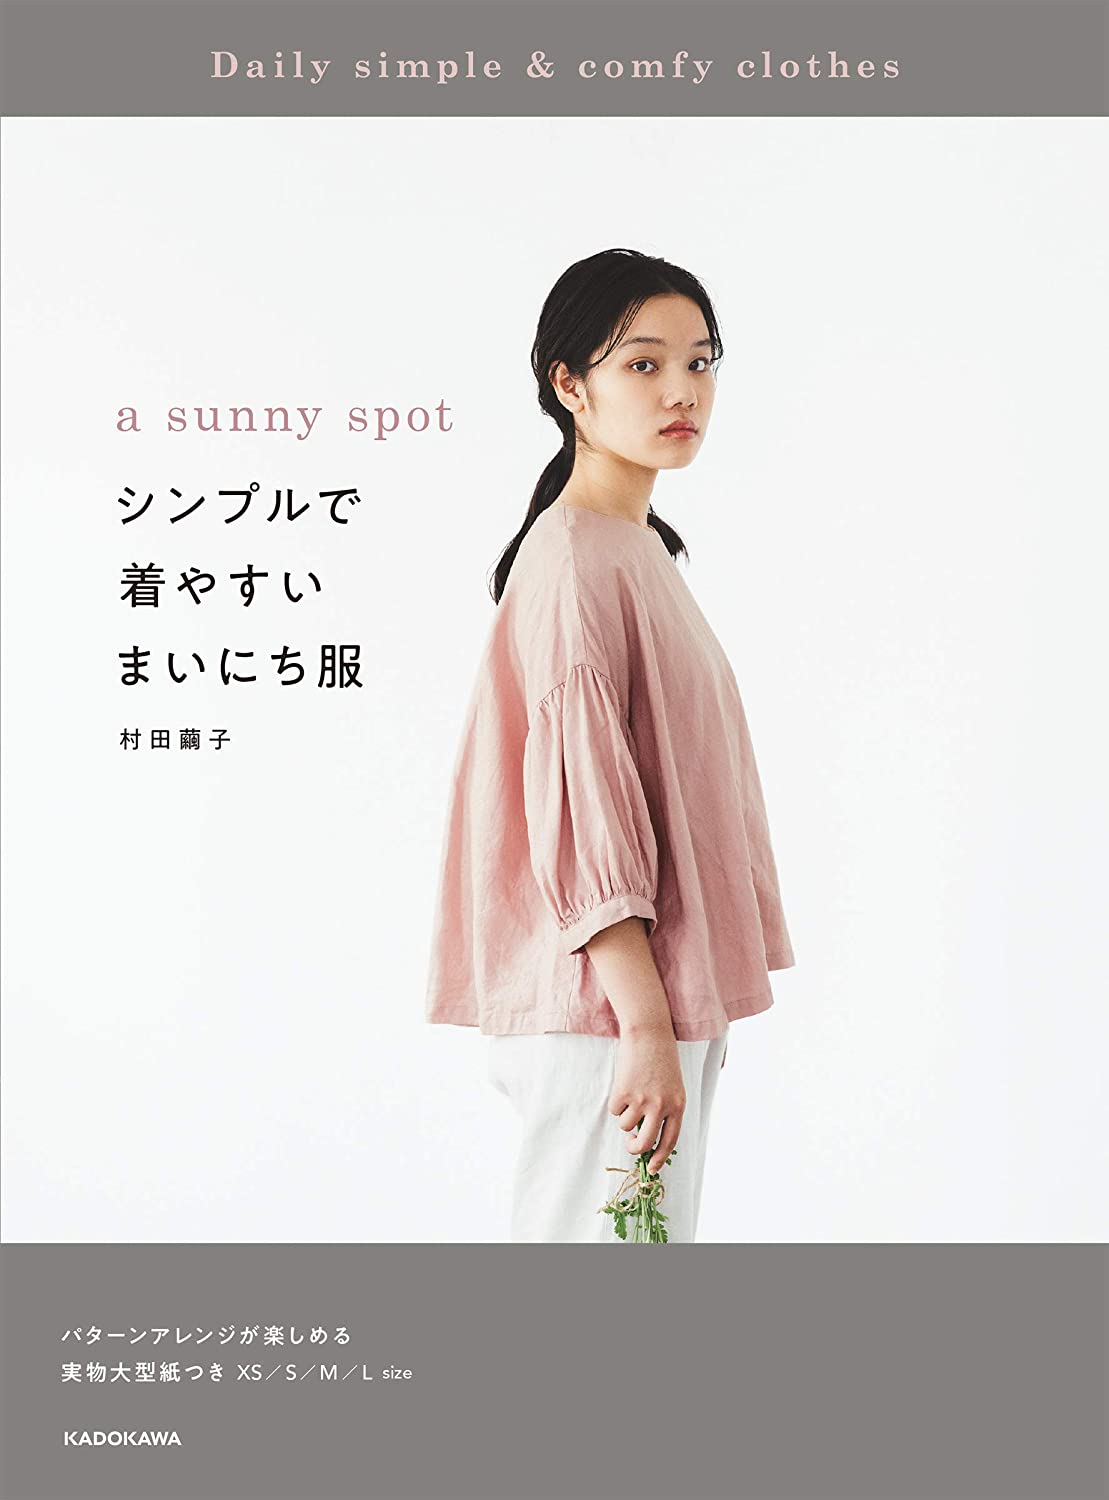 a sunny spot Simple and easy to wear everyday clothes